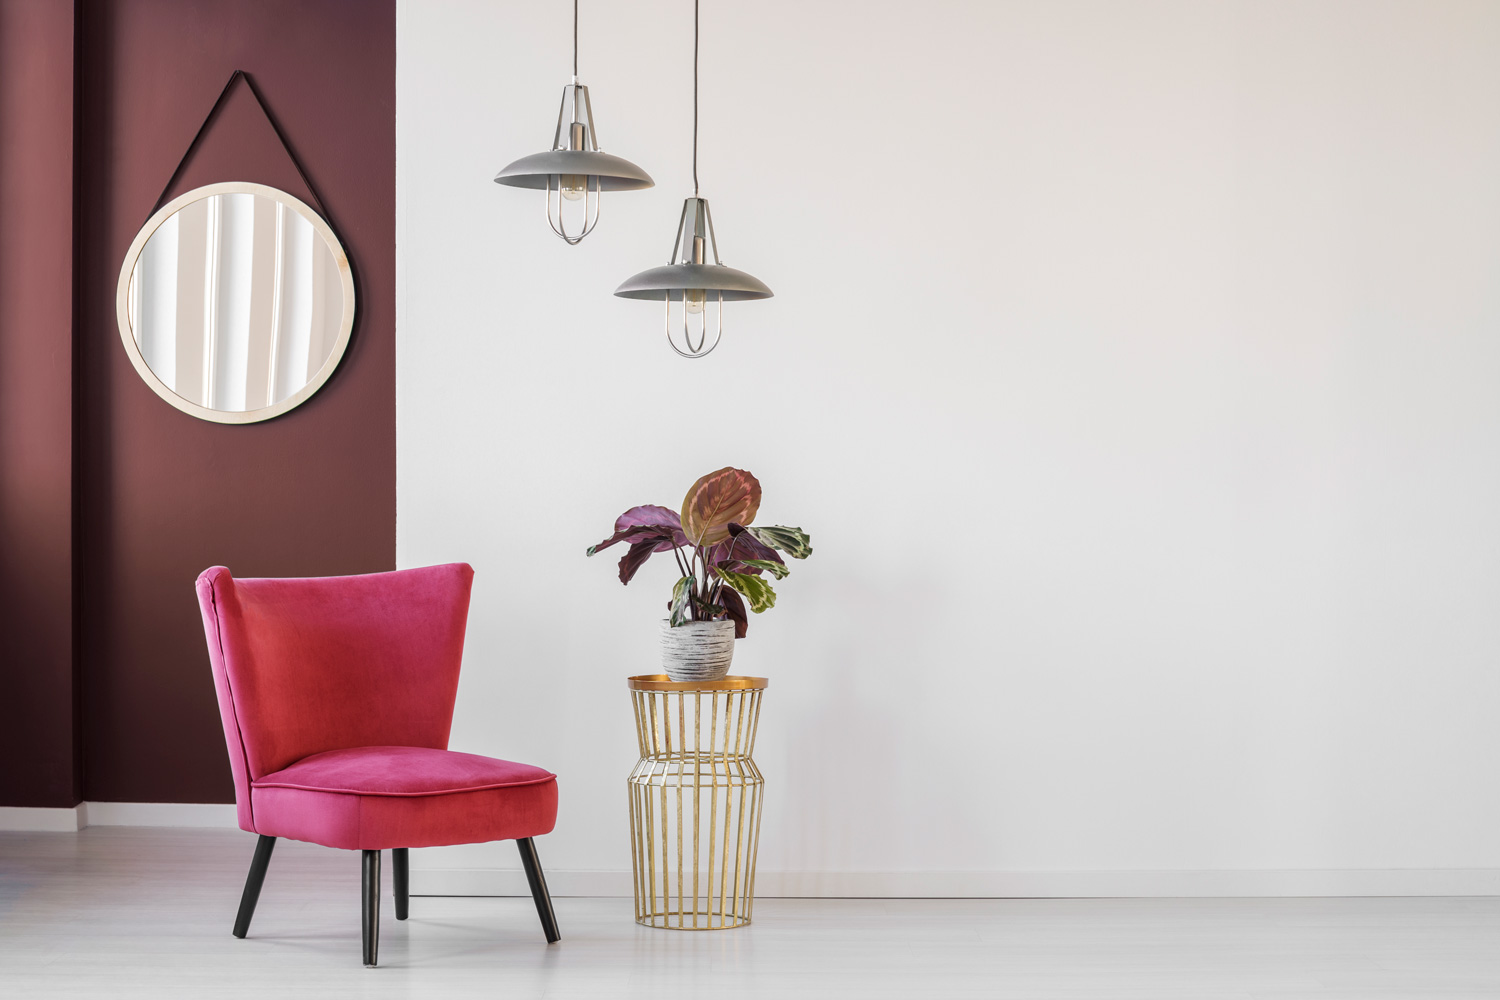 Pink armchair next to a golden, side table with a plant on empty wall in living room interior